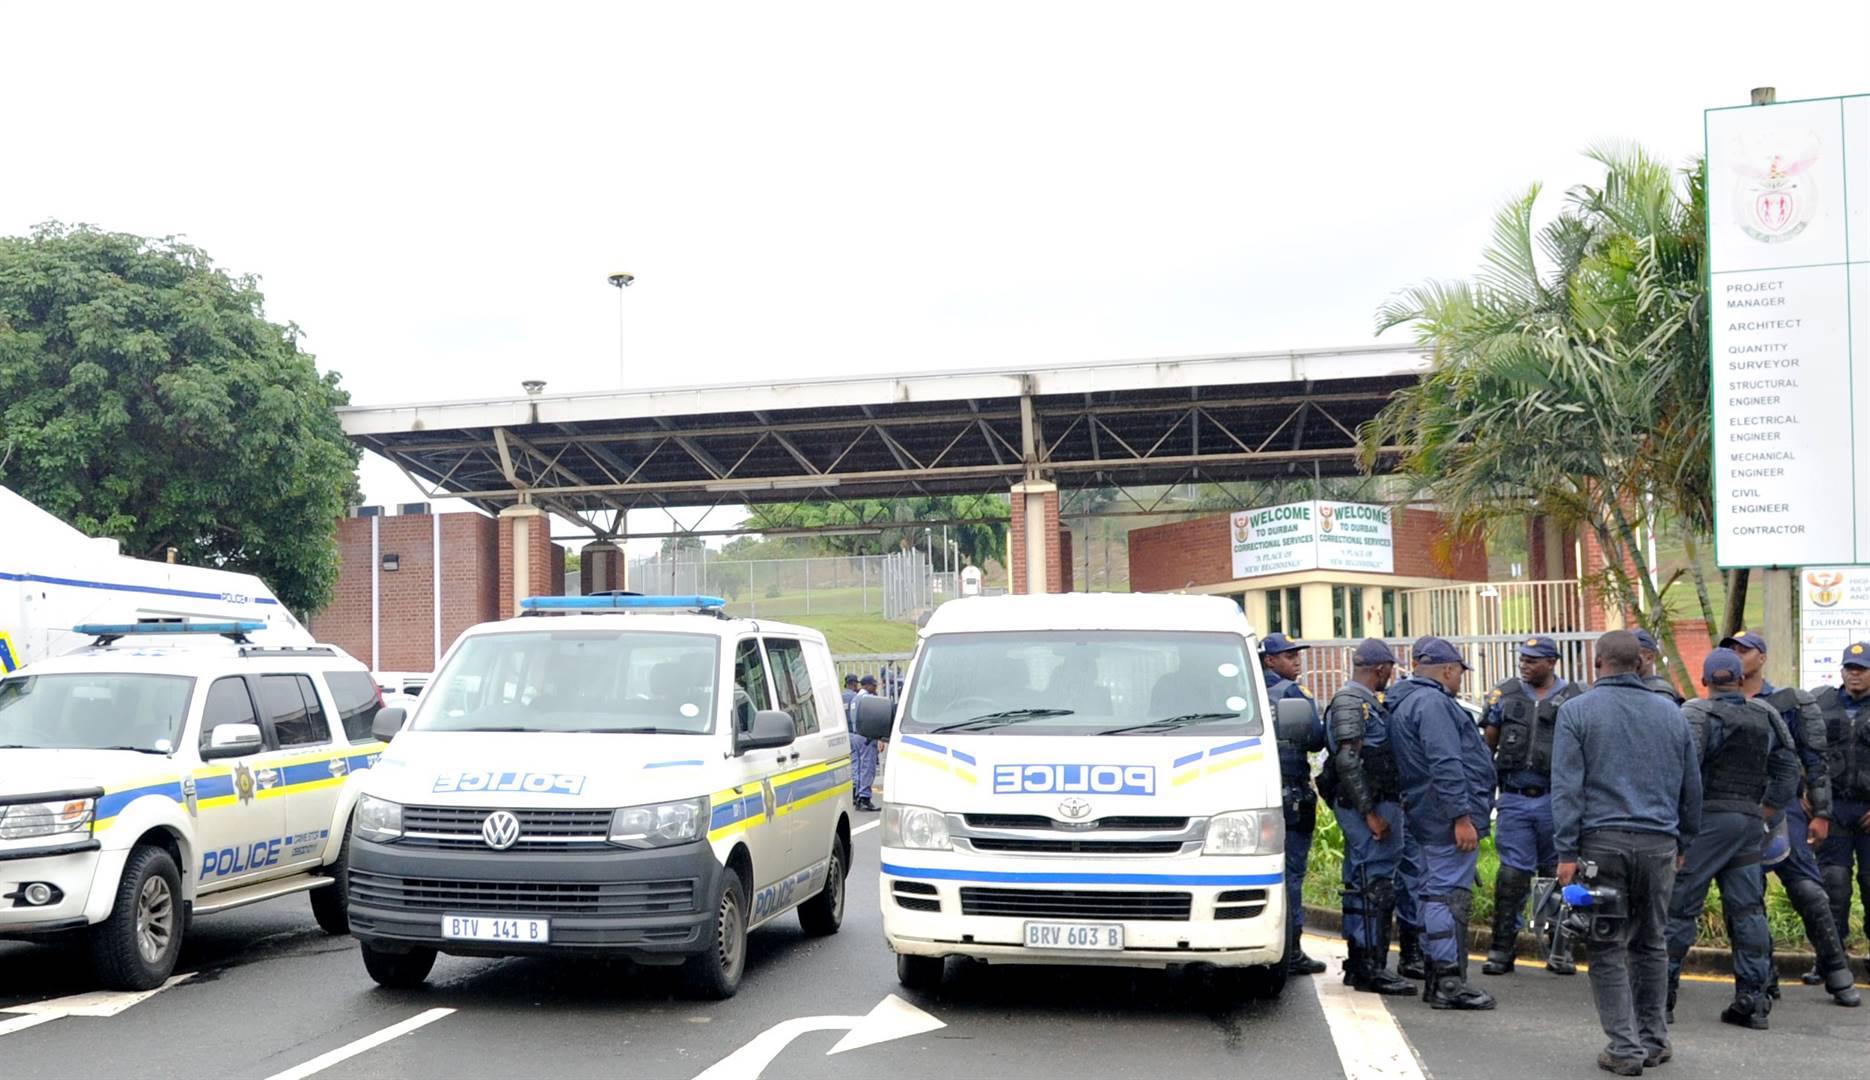 The entrance to Westville Prison in Durban, where a worker is suspected of having the coronavirus. Photo by Jabulani Langa